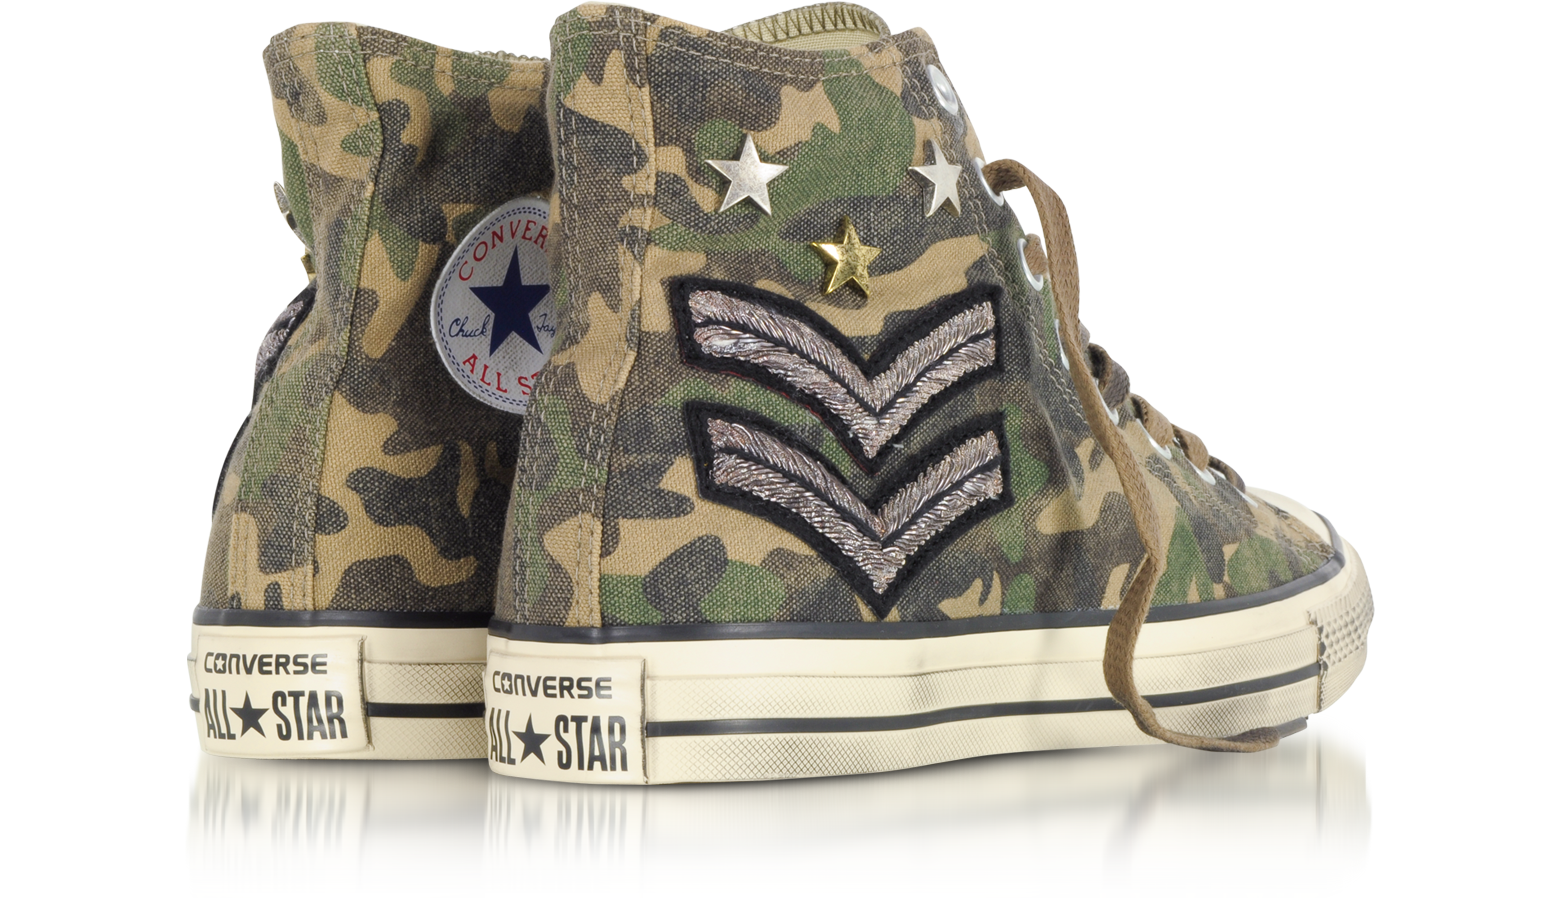 Chuck Taylor All Star High Sneakers in Canvas Camouflage con Patches Converse  Limited Edition 4.5 (37 EU) su FORZIERI